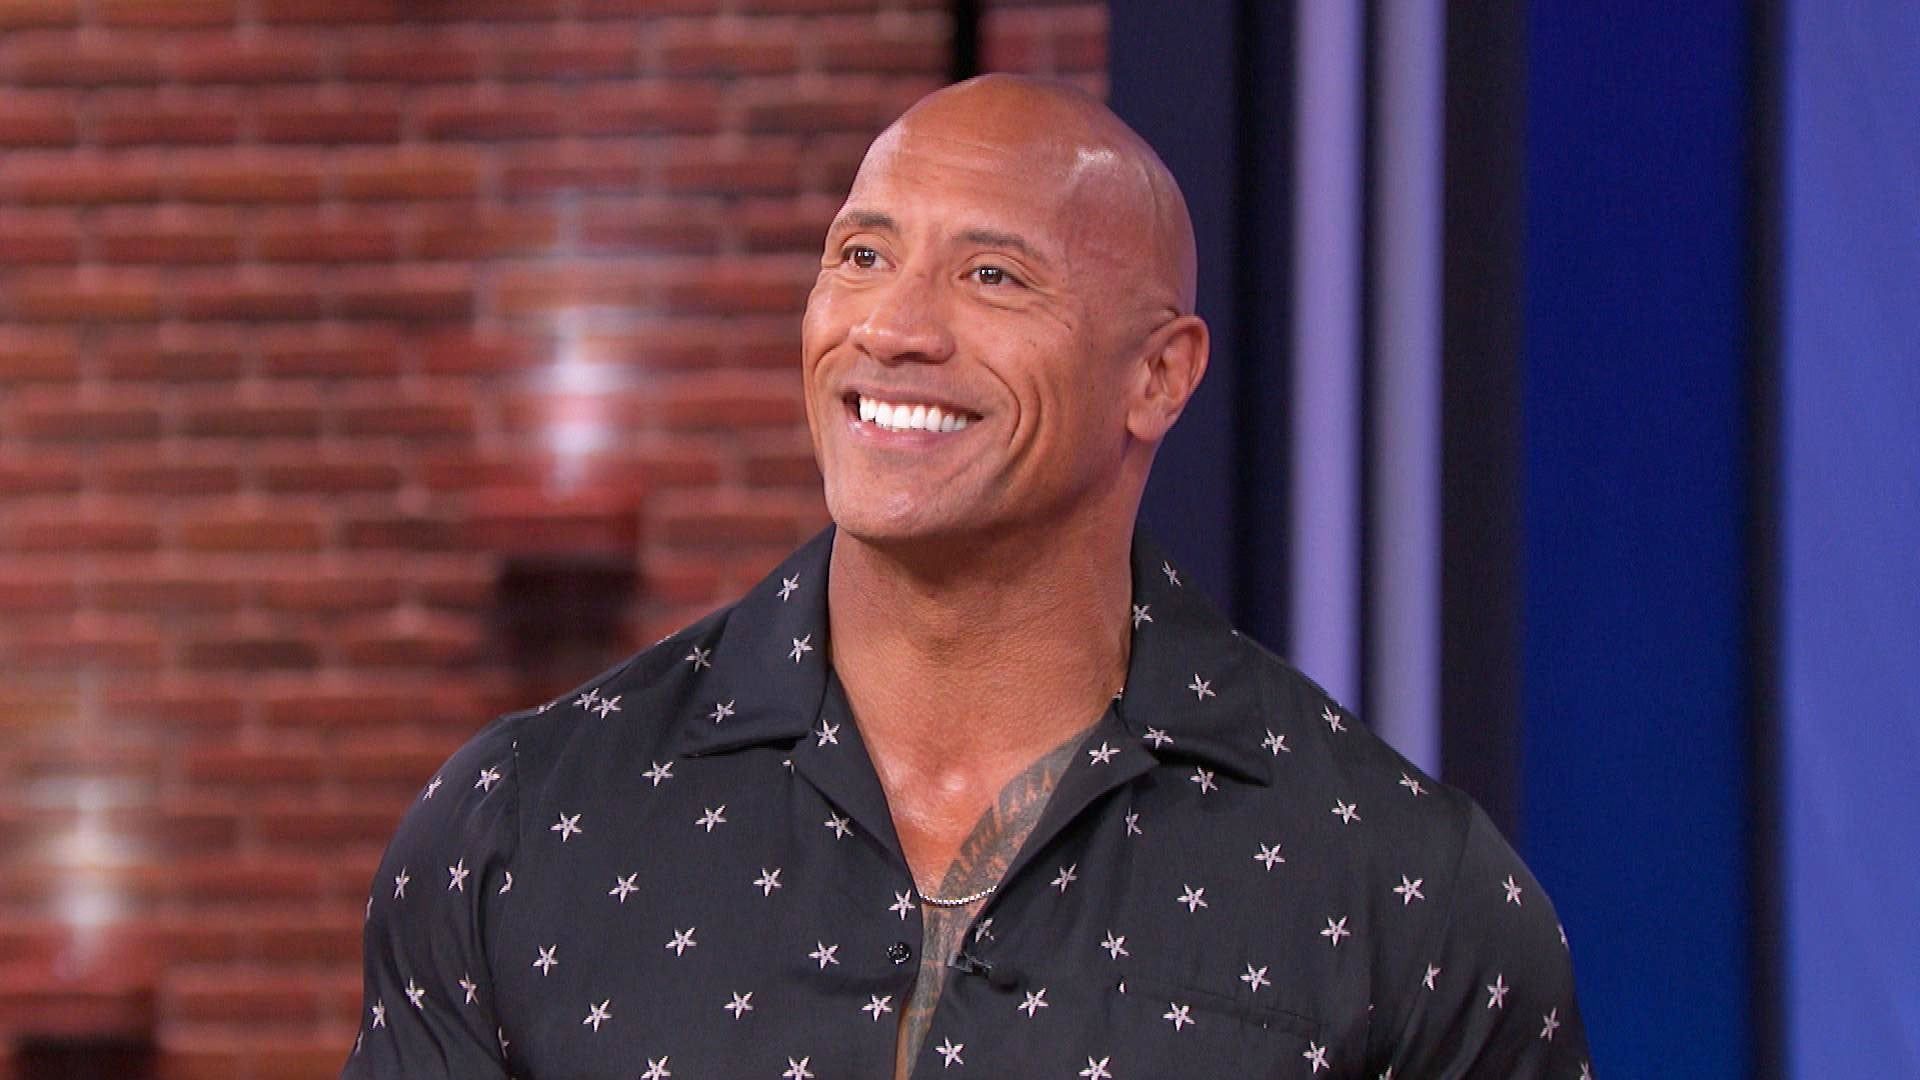 Dwayne Johnson Gives Health Update on Kevin Hart as He Jokes About